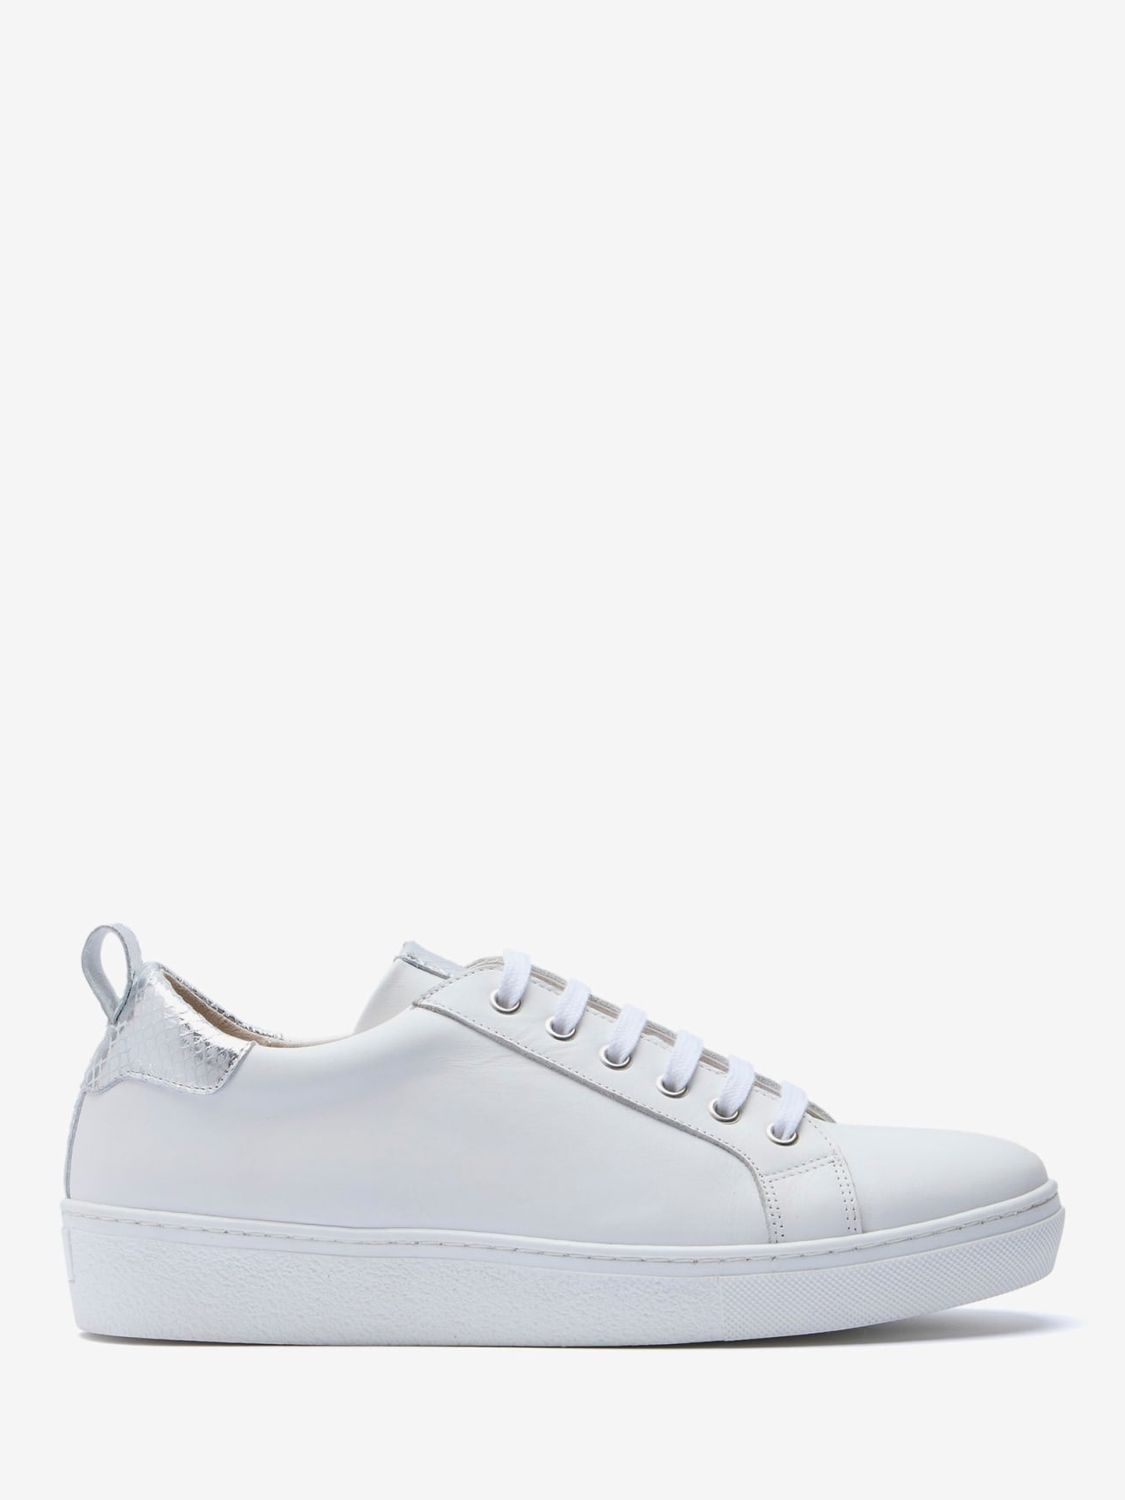 Mint Velvet Leather Lace-Up Trainers, White/Silver at John Lewis & Partners